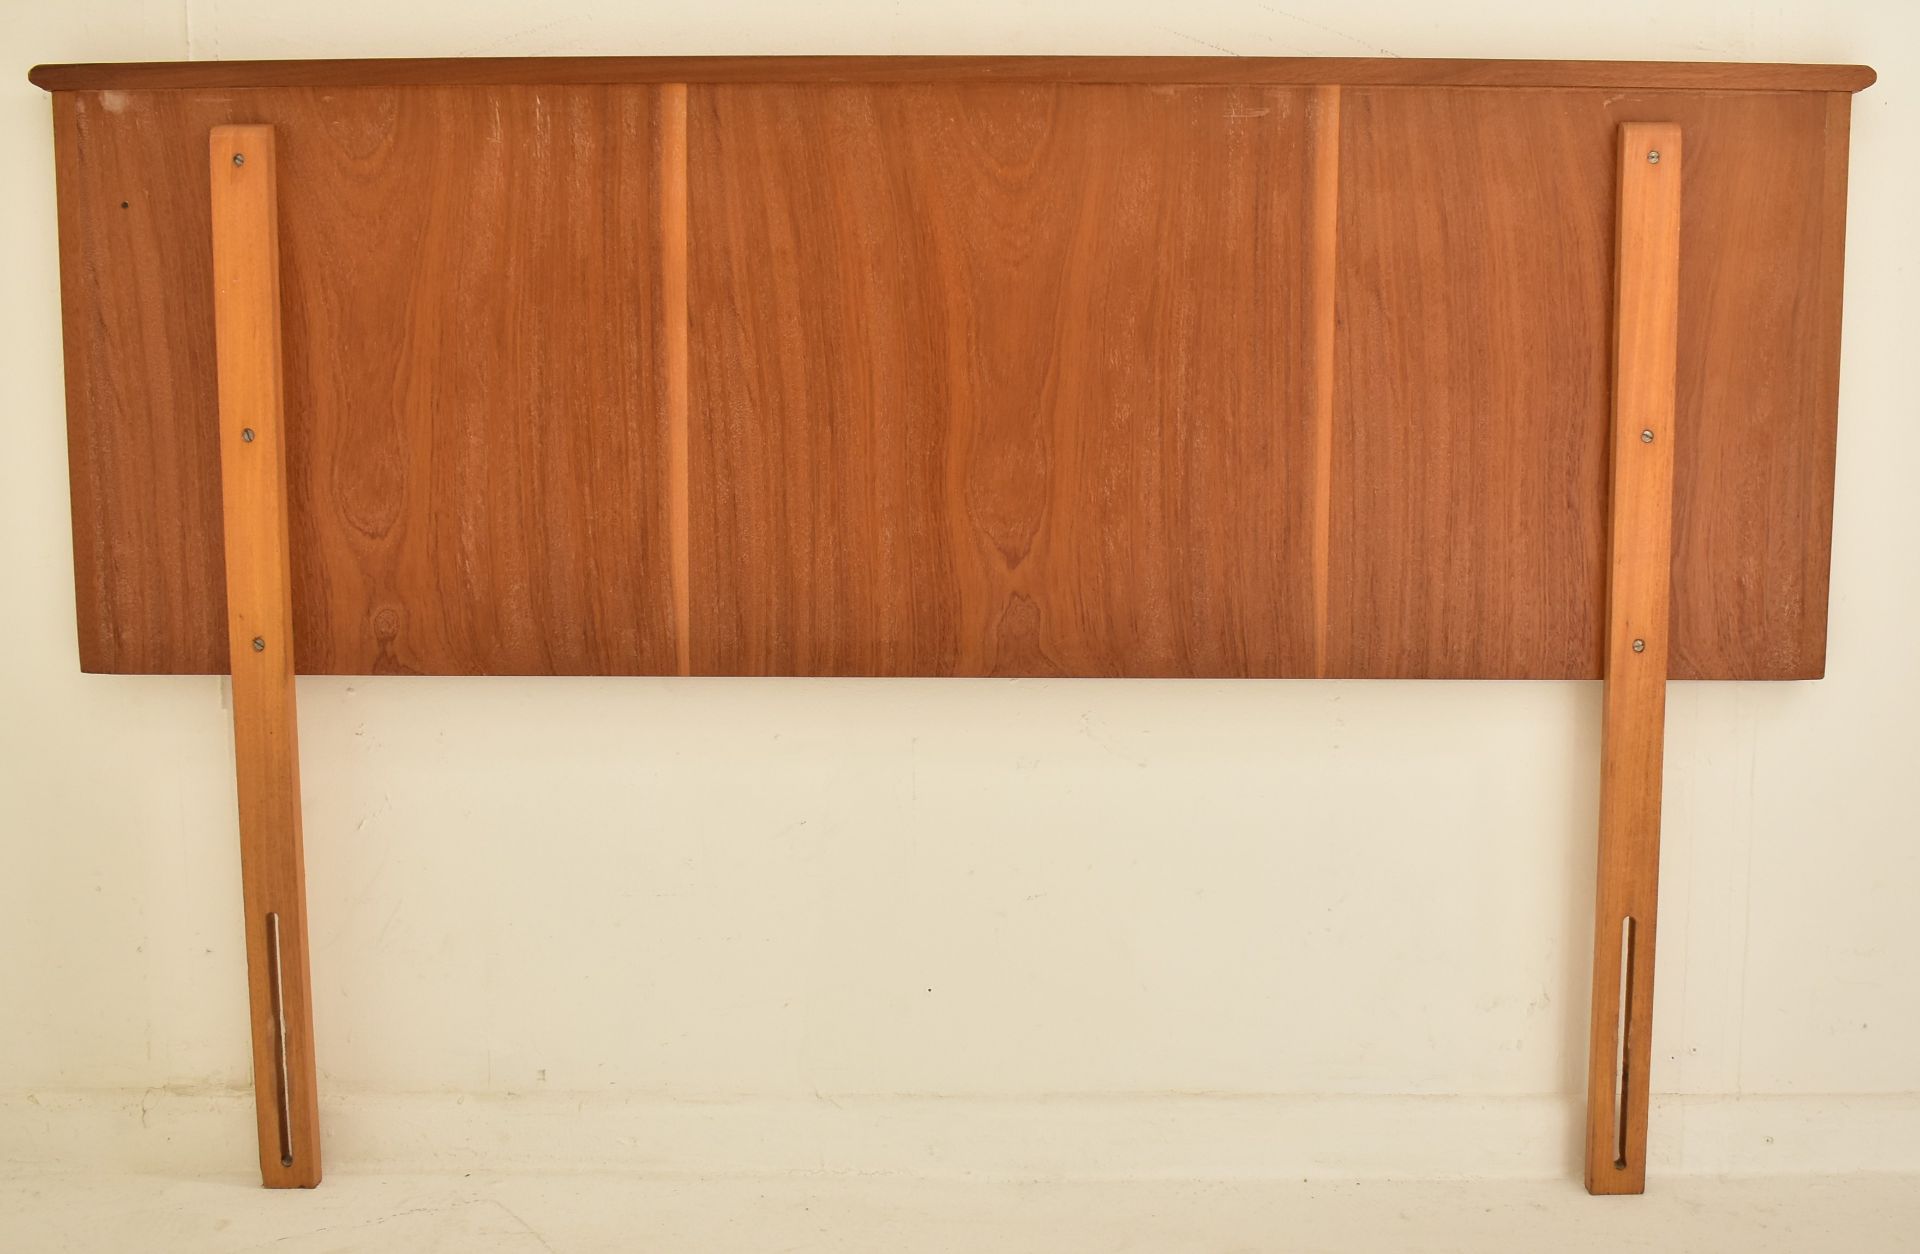 ALFRED COX FOR AC FURNITURE - MID CENTURY WALNUT HEADBOARD - Image 5 of 5